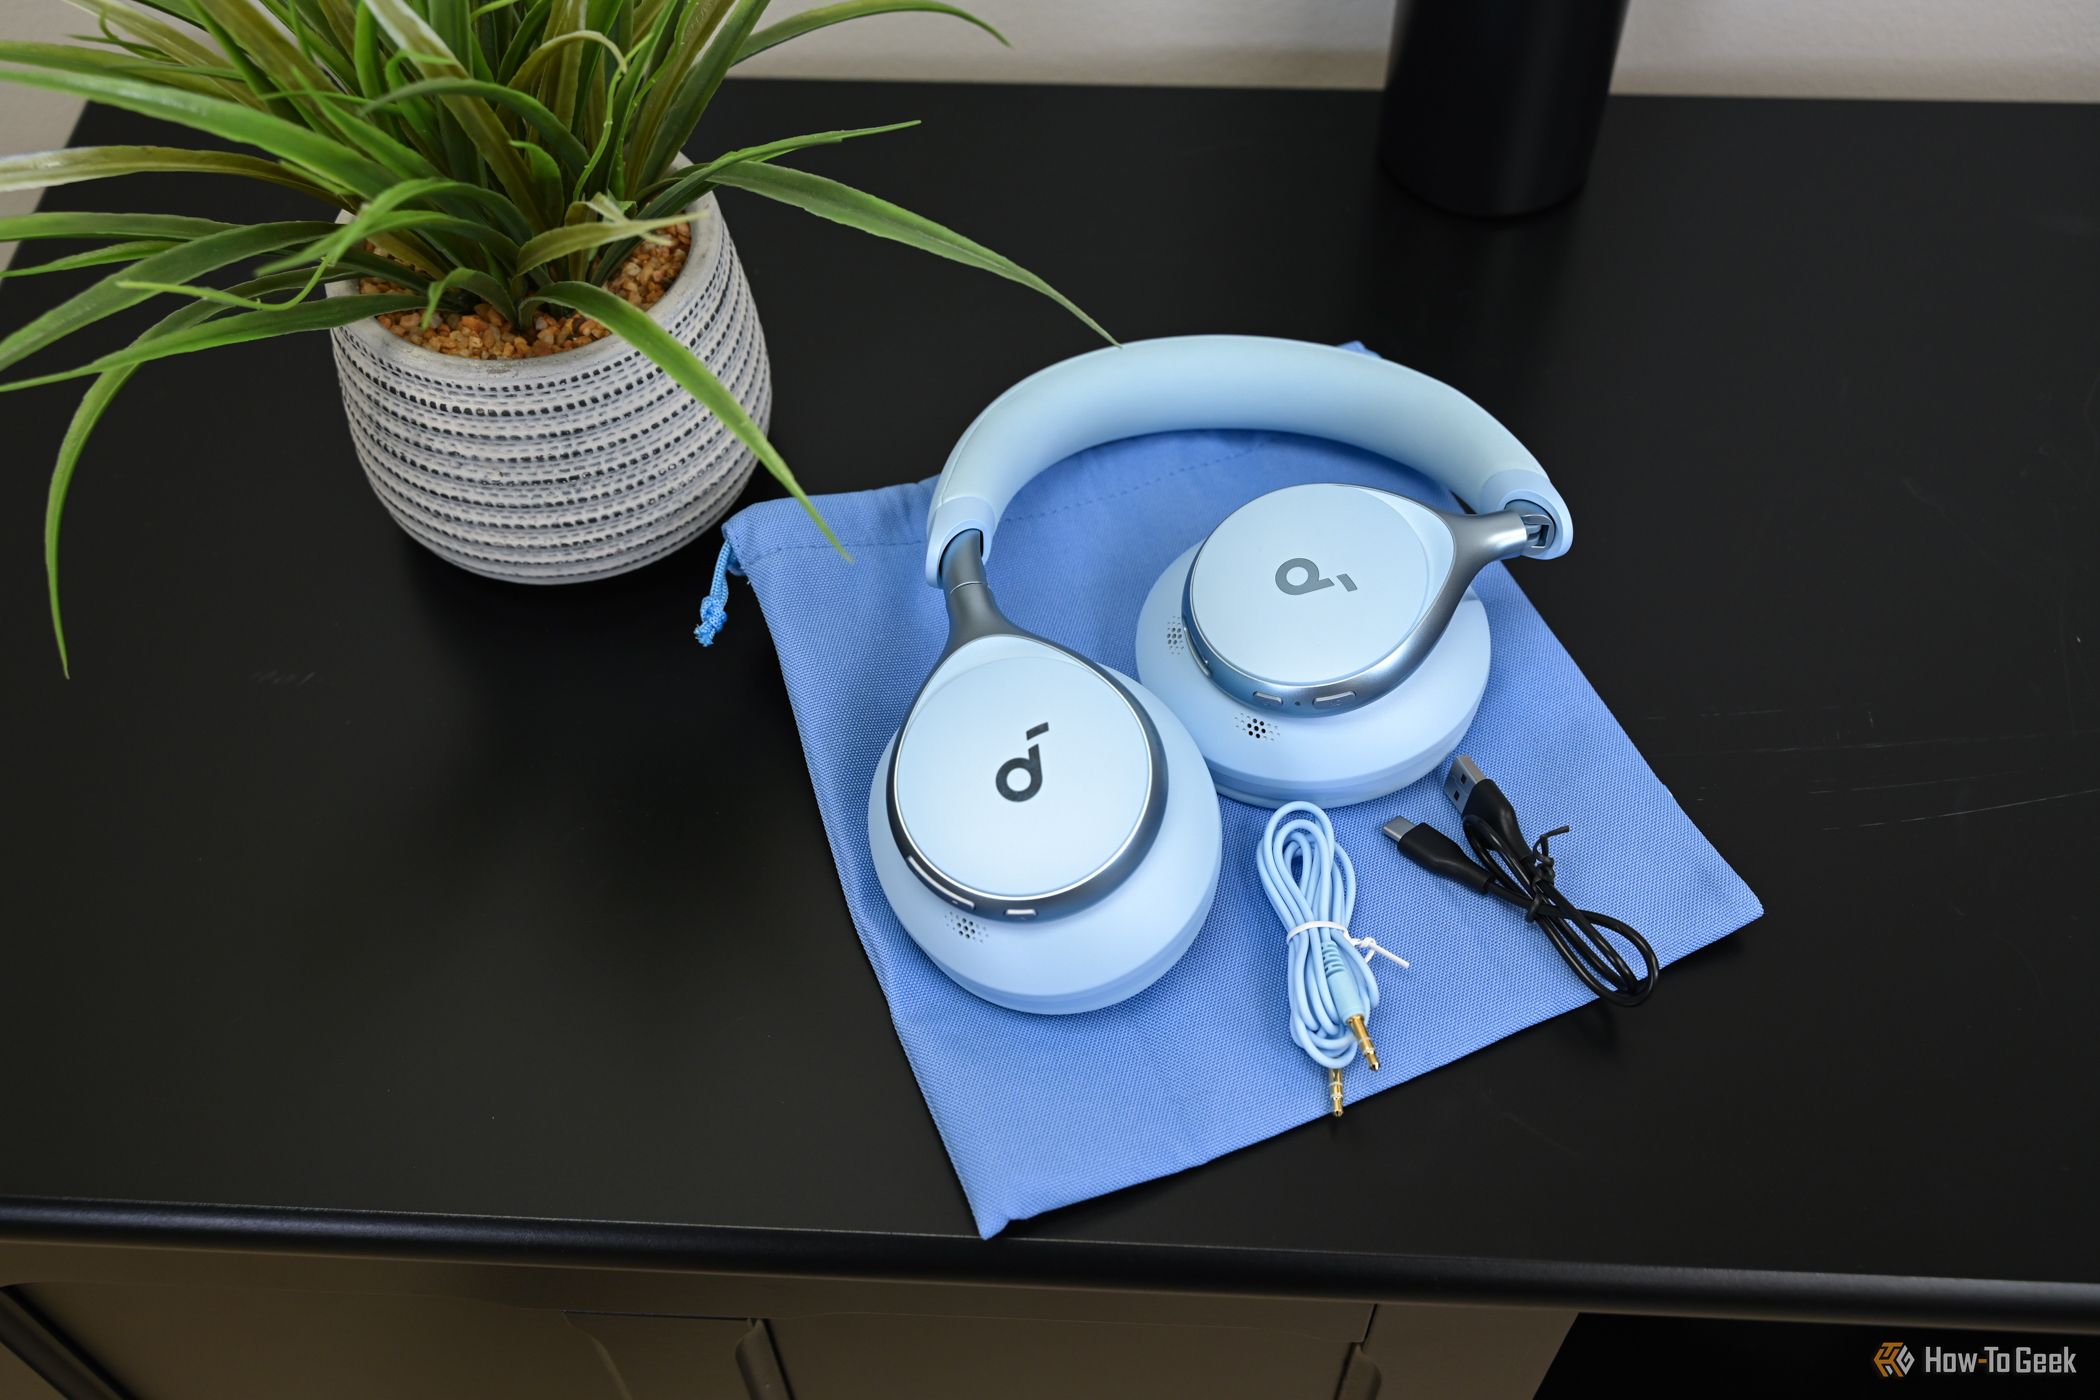 Soundcore Space One headphones on a table with charging wire and AUX cable